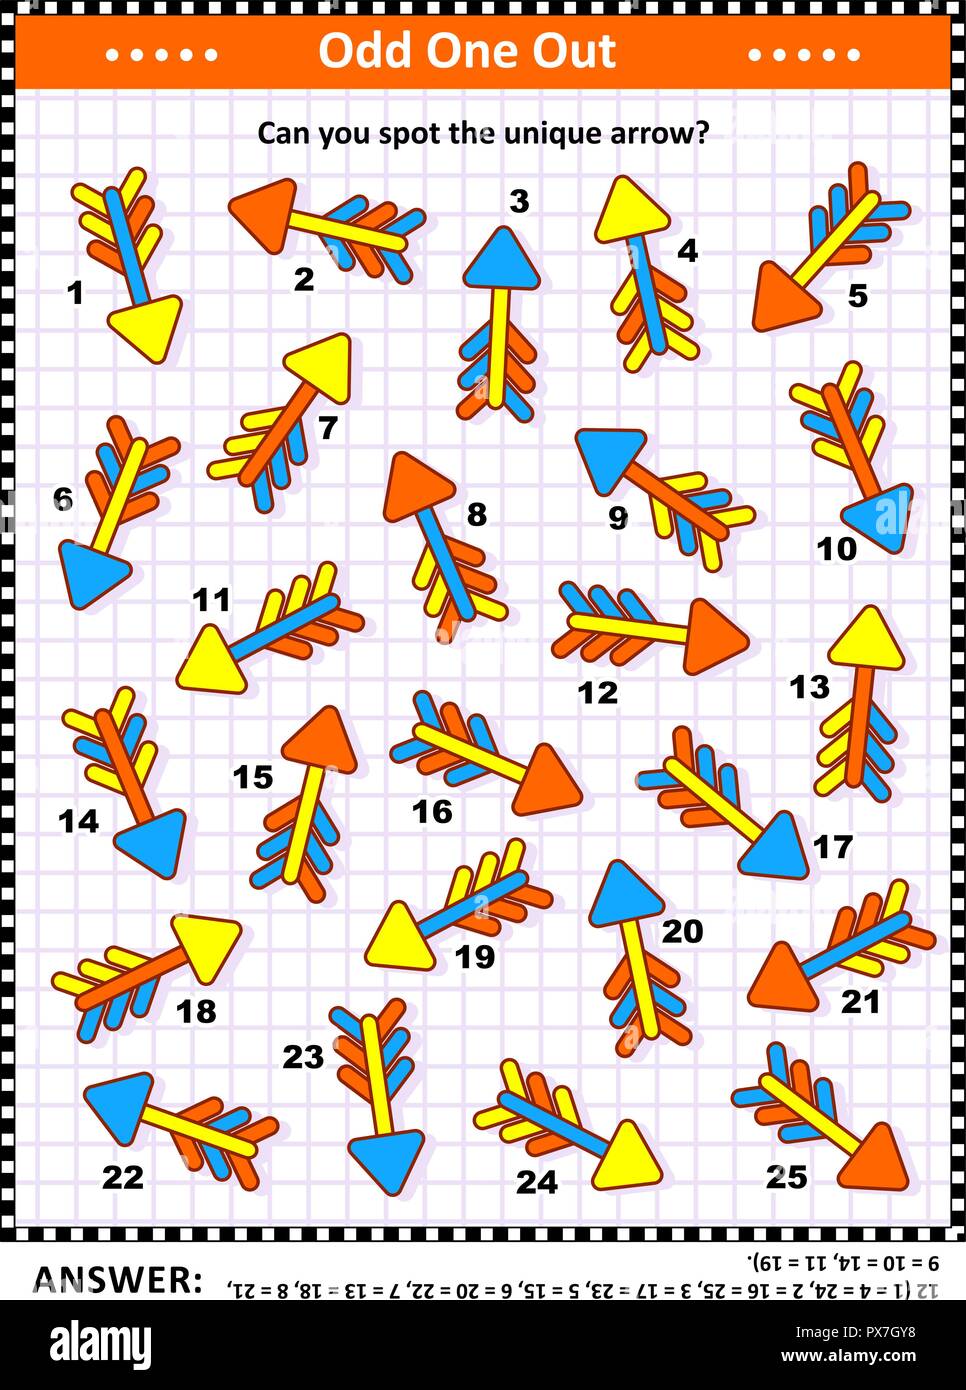 IQ training visual puzzle with colorful arrows (suitable both for kids and adults): Spot the odd one out. Find the unique arrow. Answer included. Stock Vector